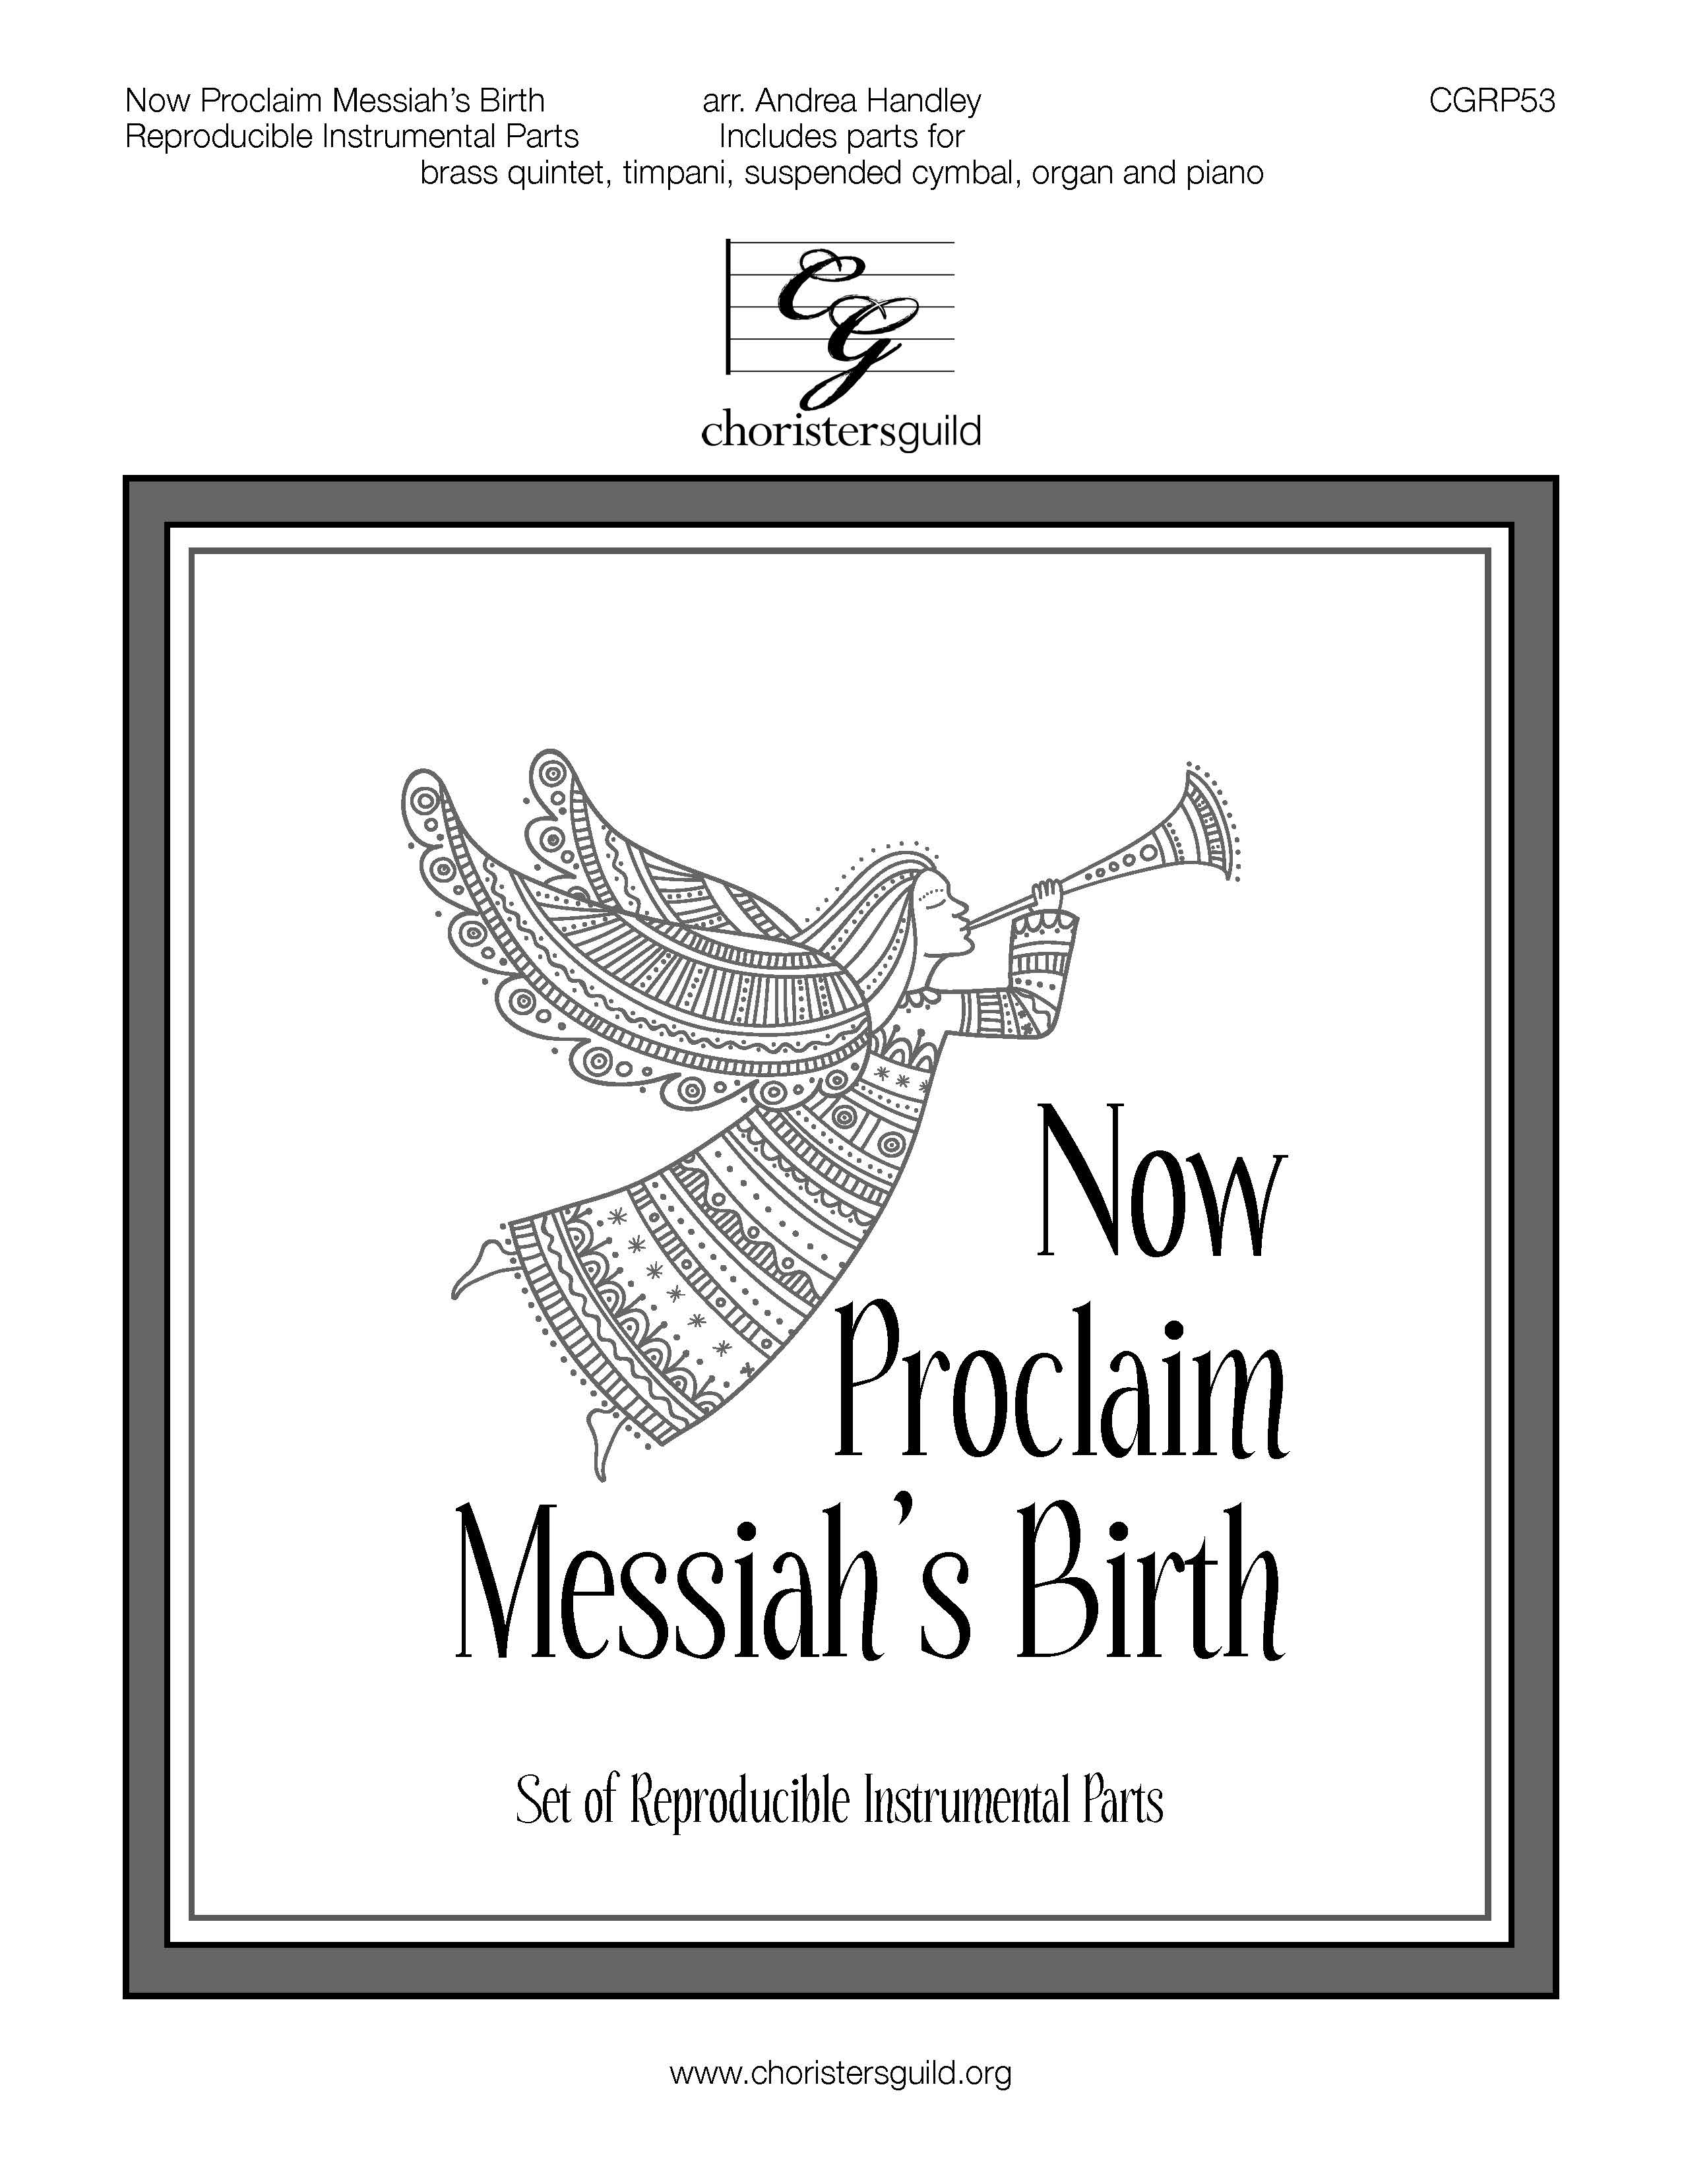 Now Proclaim Messiah's Birth - Reproducible Instrumental Parts